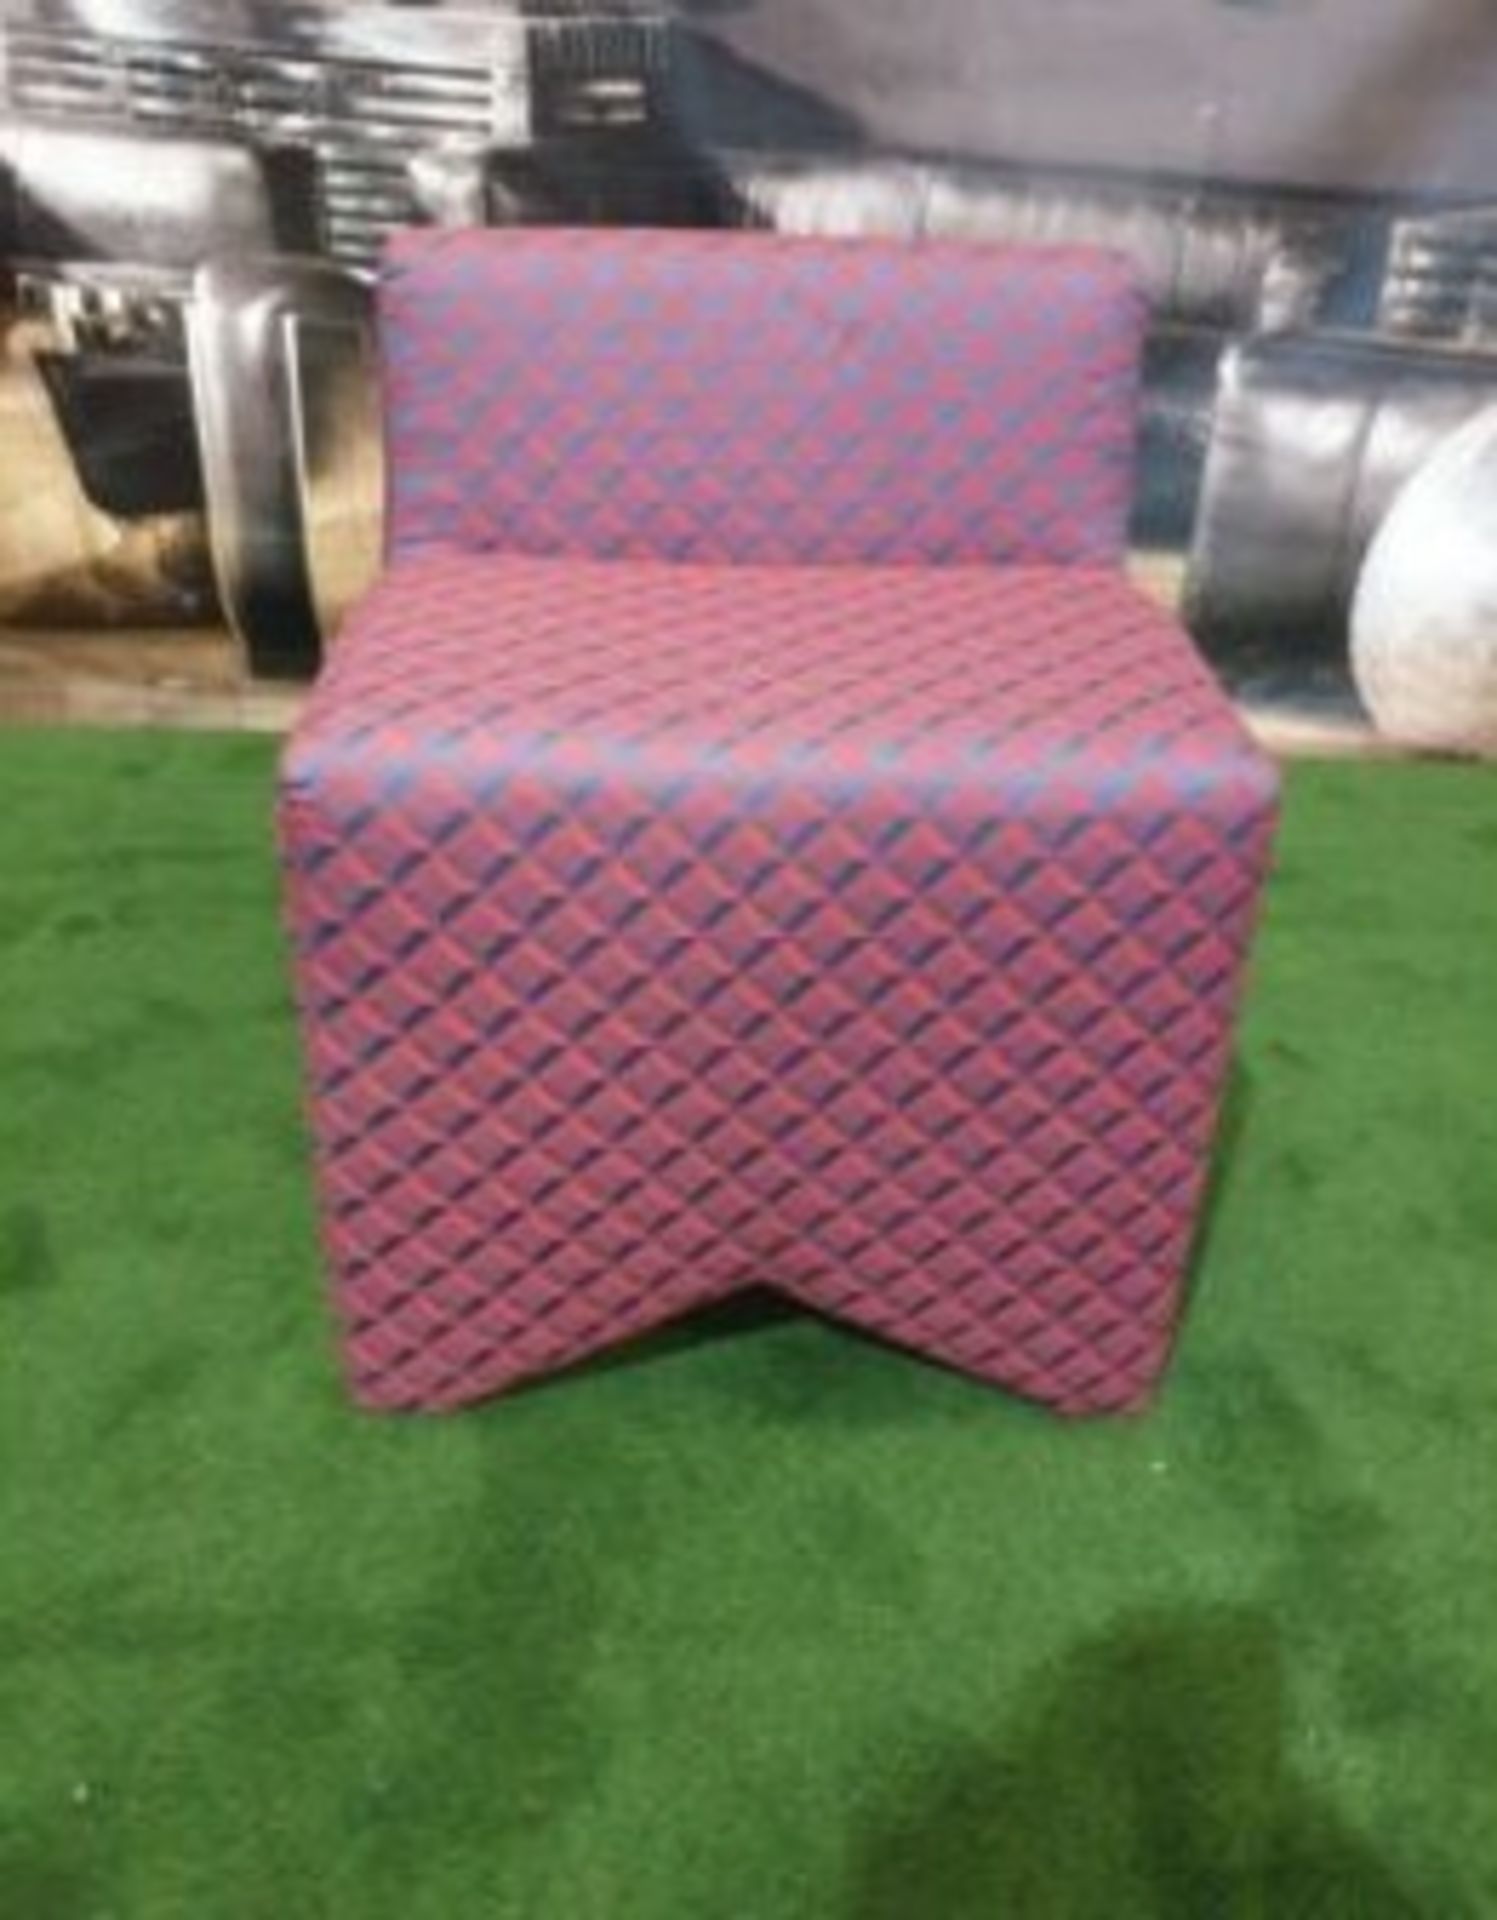 Designer Inspired Low Level Chair In Blue & Pink Patterned Upholstery 50 x 33 x 64cm (ST37) This